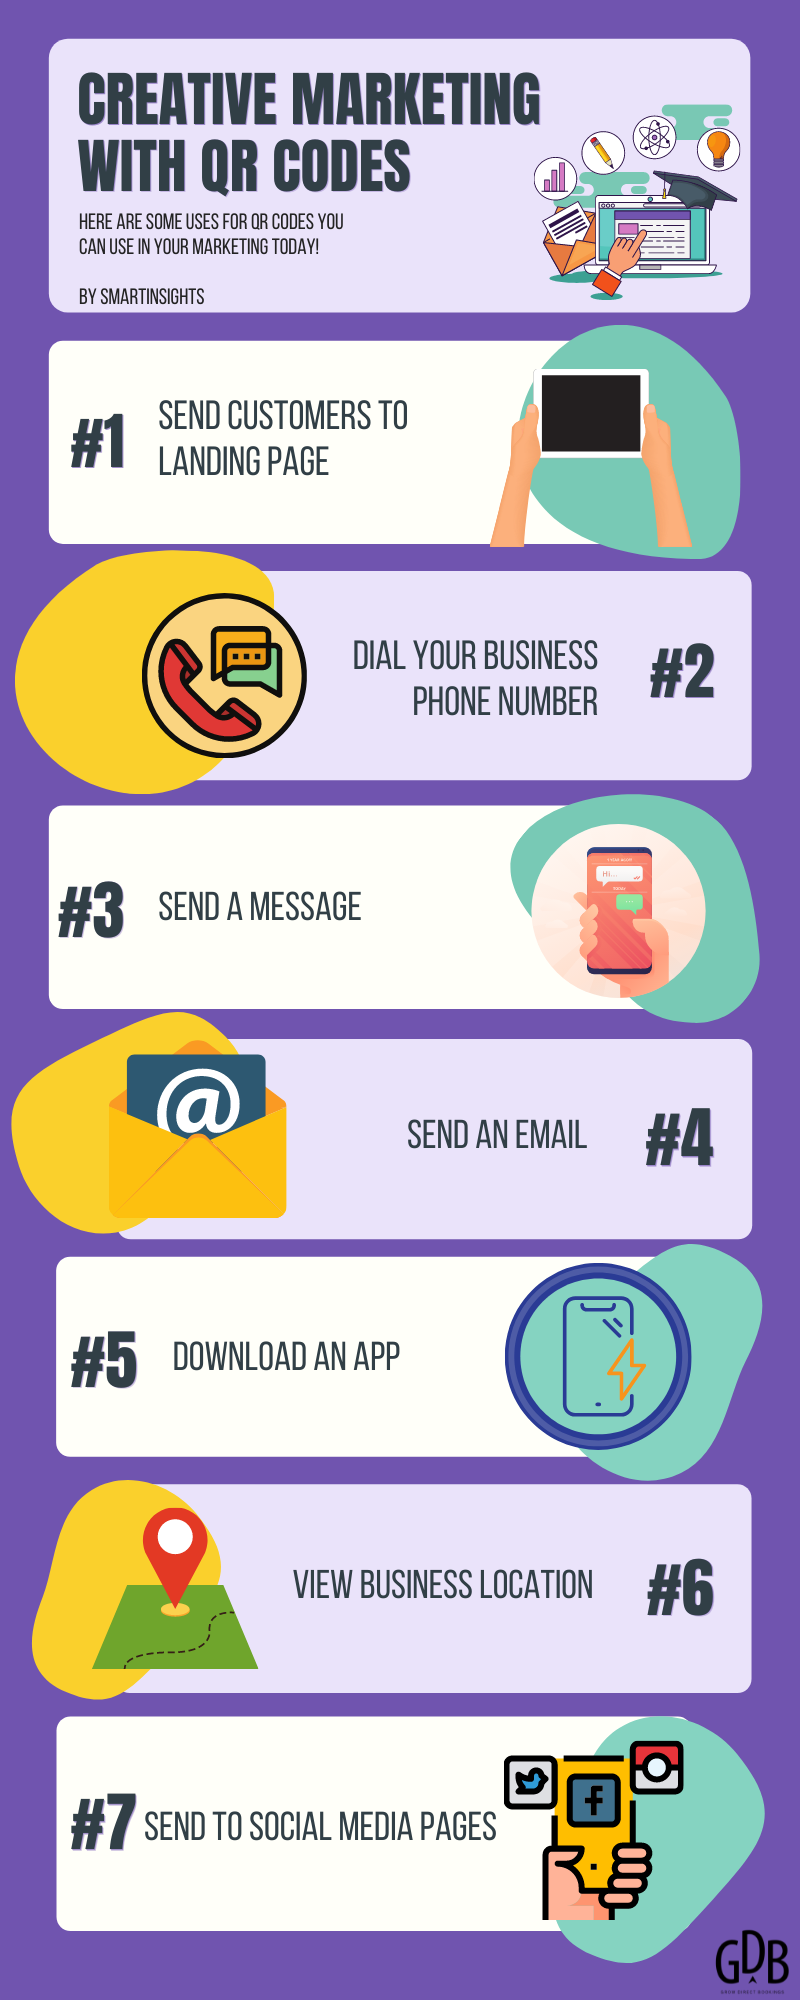 Creative Marketing infographic with 7 creative uses for QR codes. Send customers to a landing page. Dial your business phone number. Send a message. Send an email. Download an app. View business location. Send to social media pages.